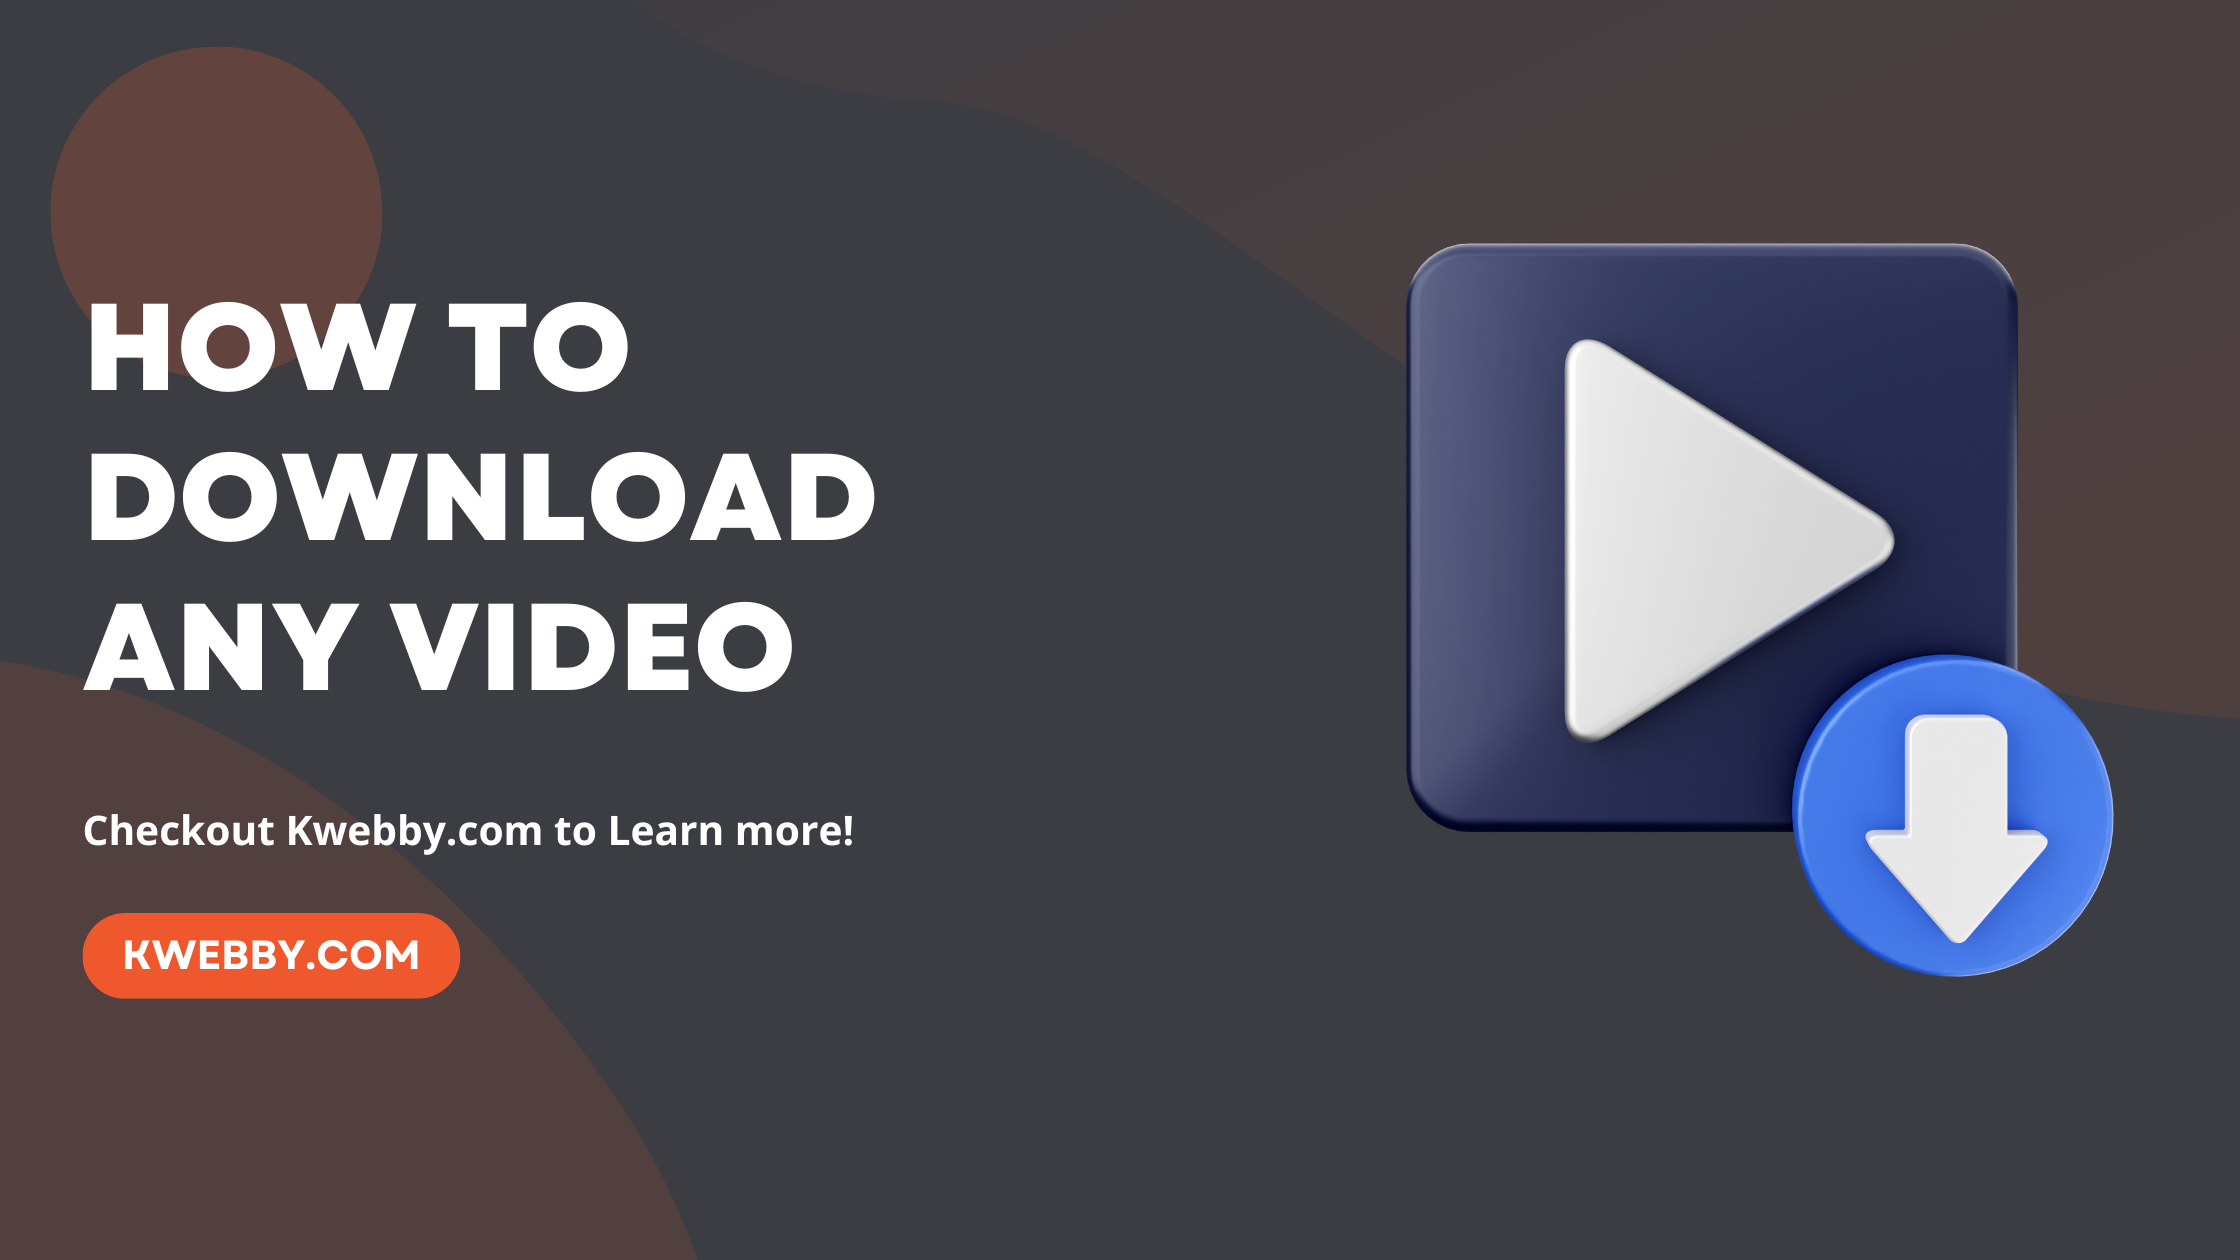 How to Download any video from the internet